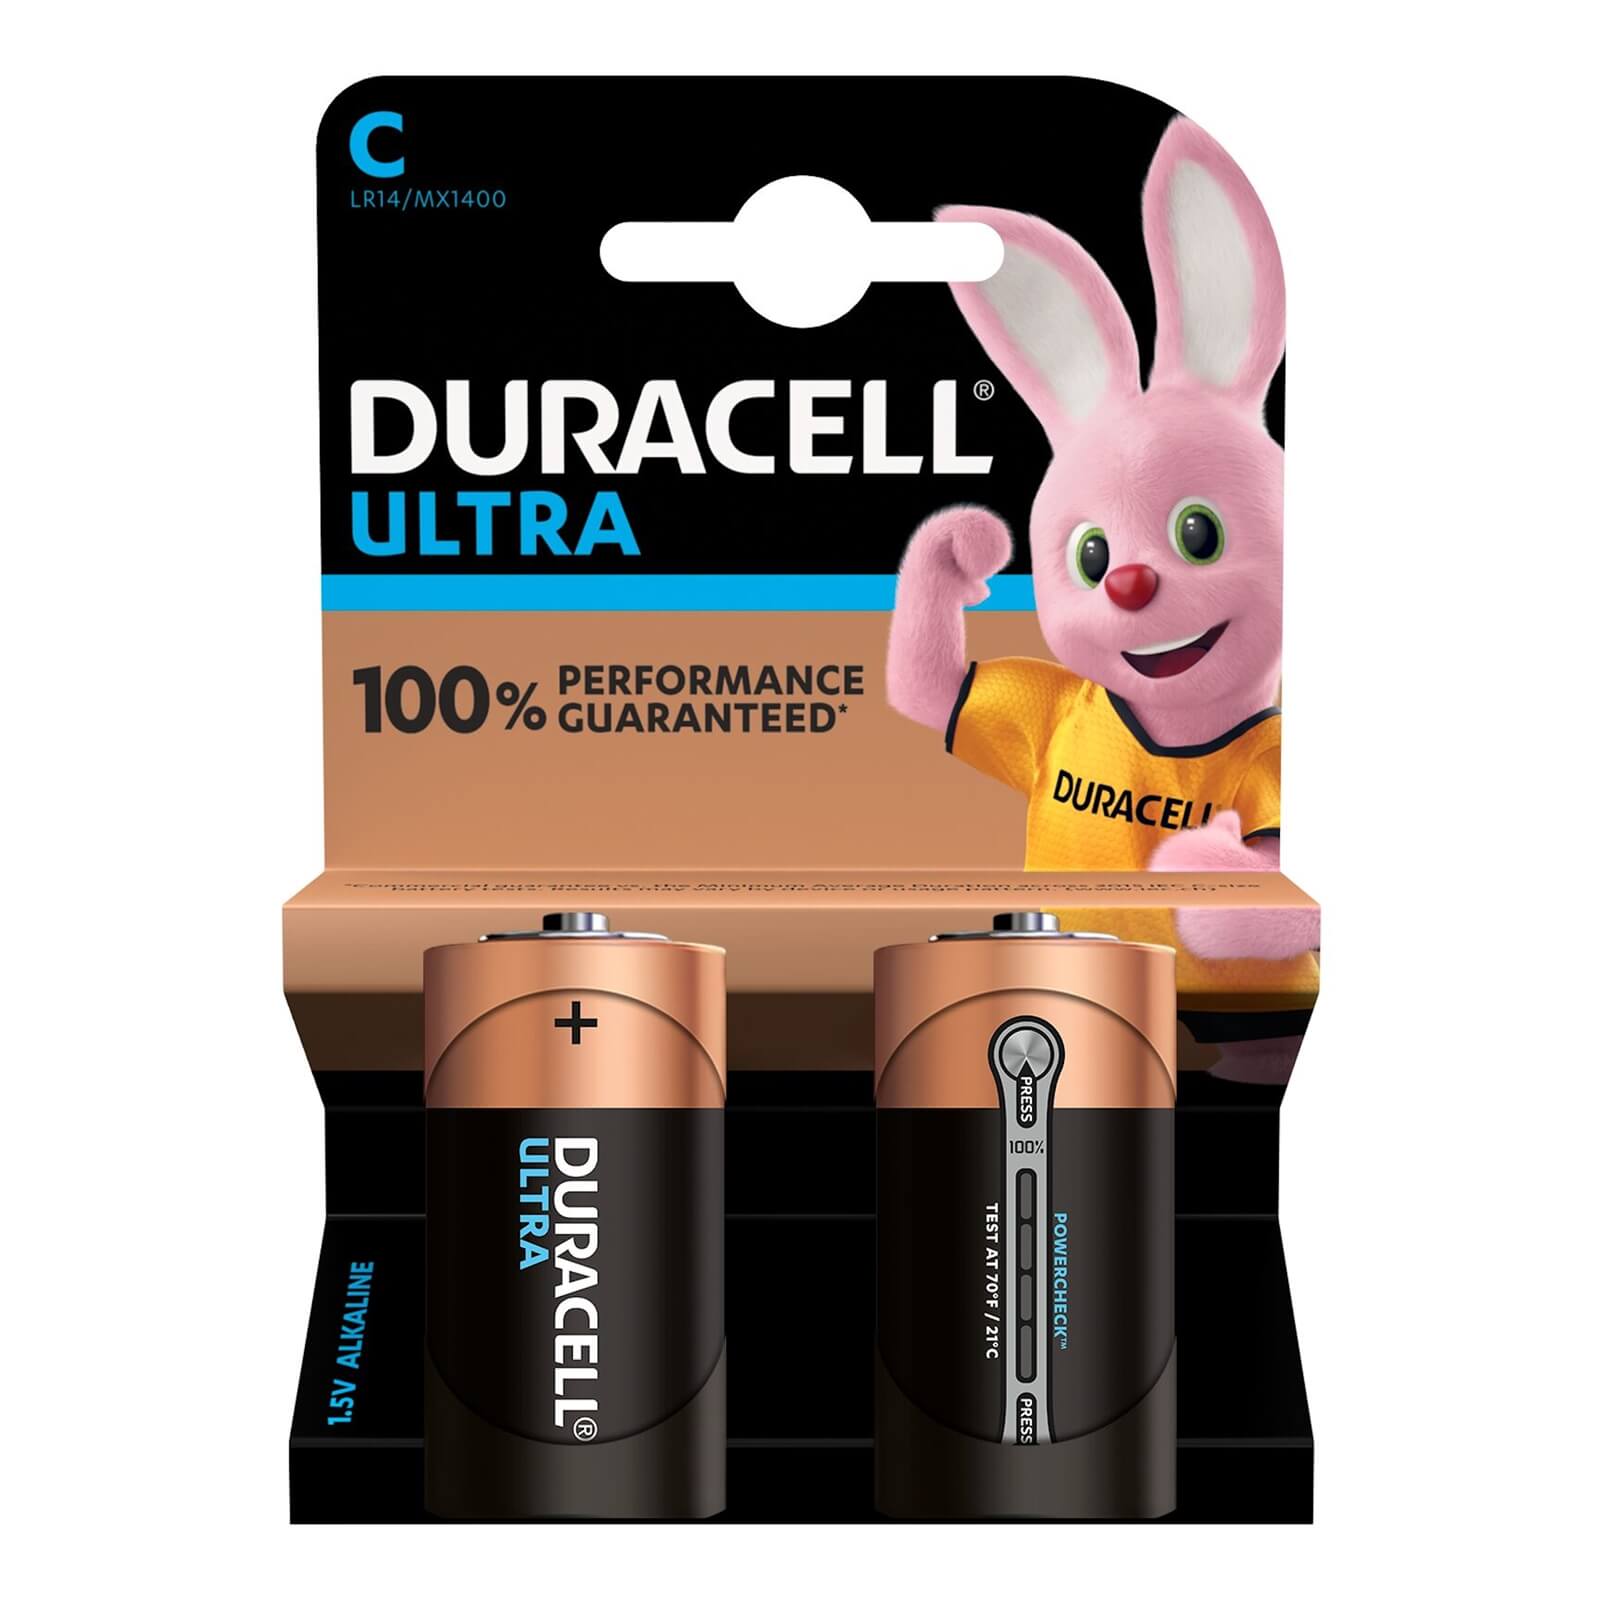 Duracell Ultra MX 1400 C - Pack of 2